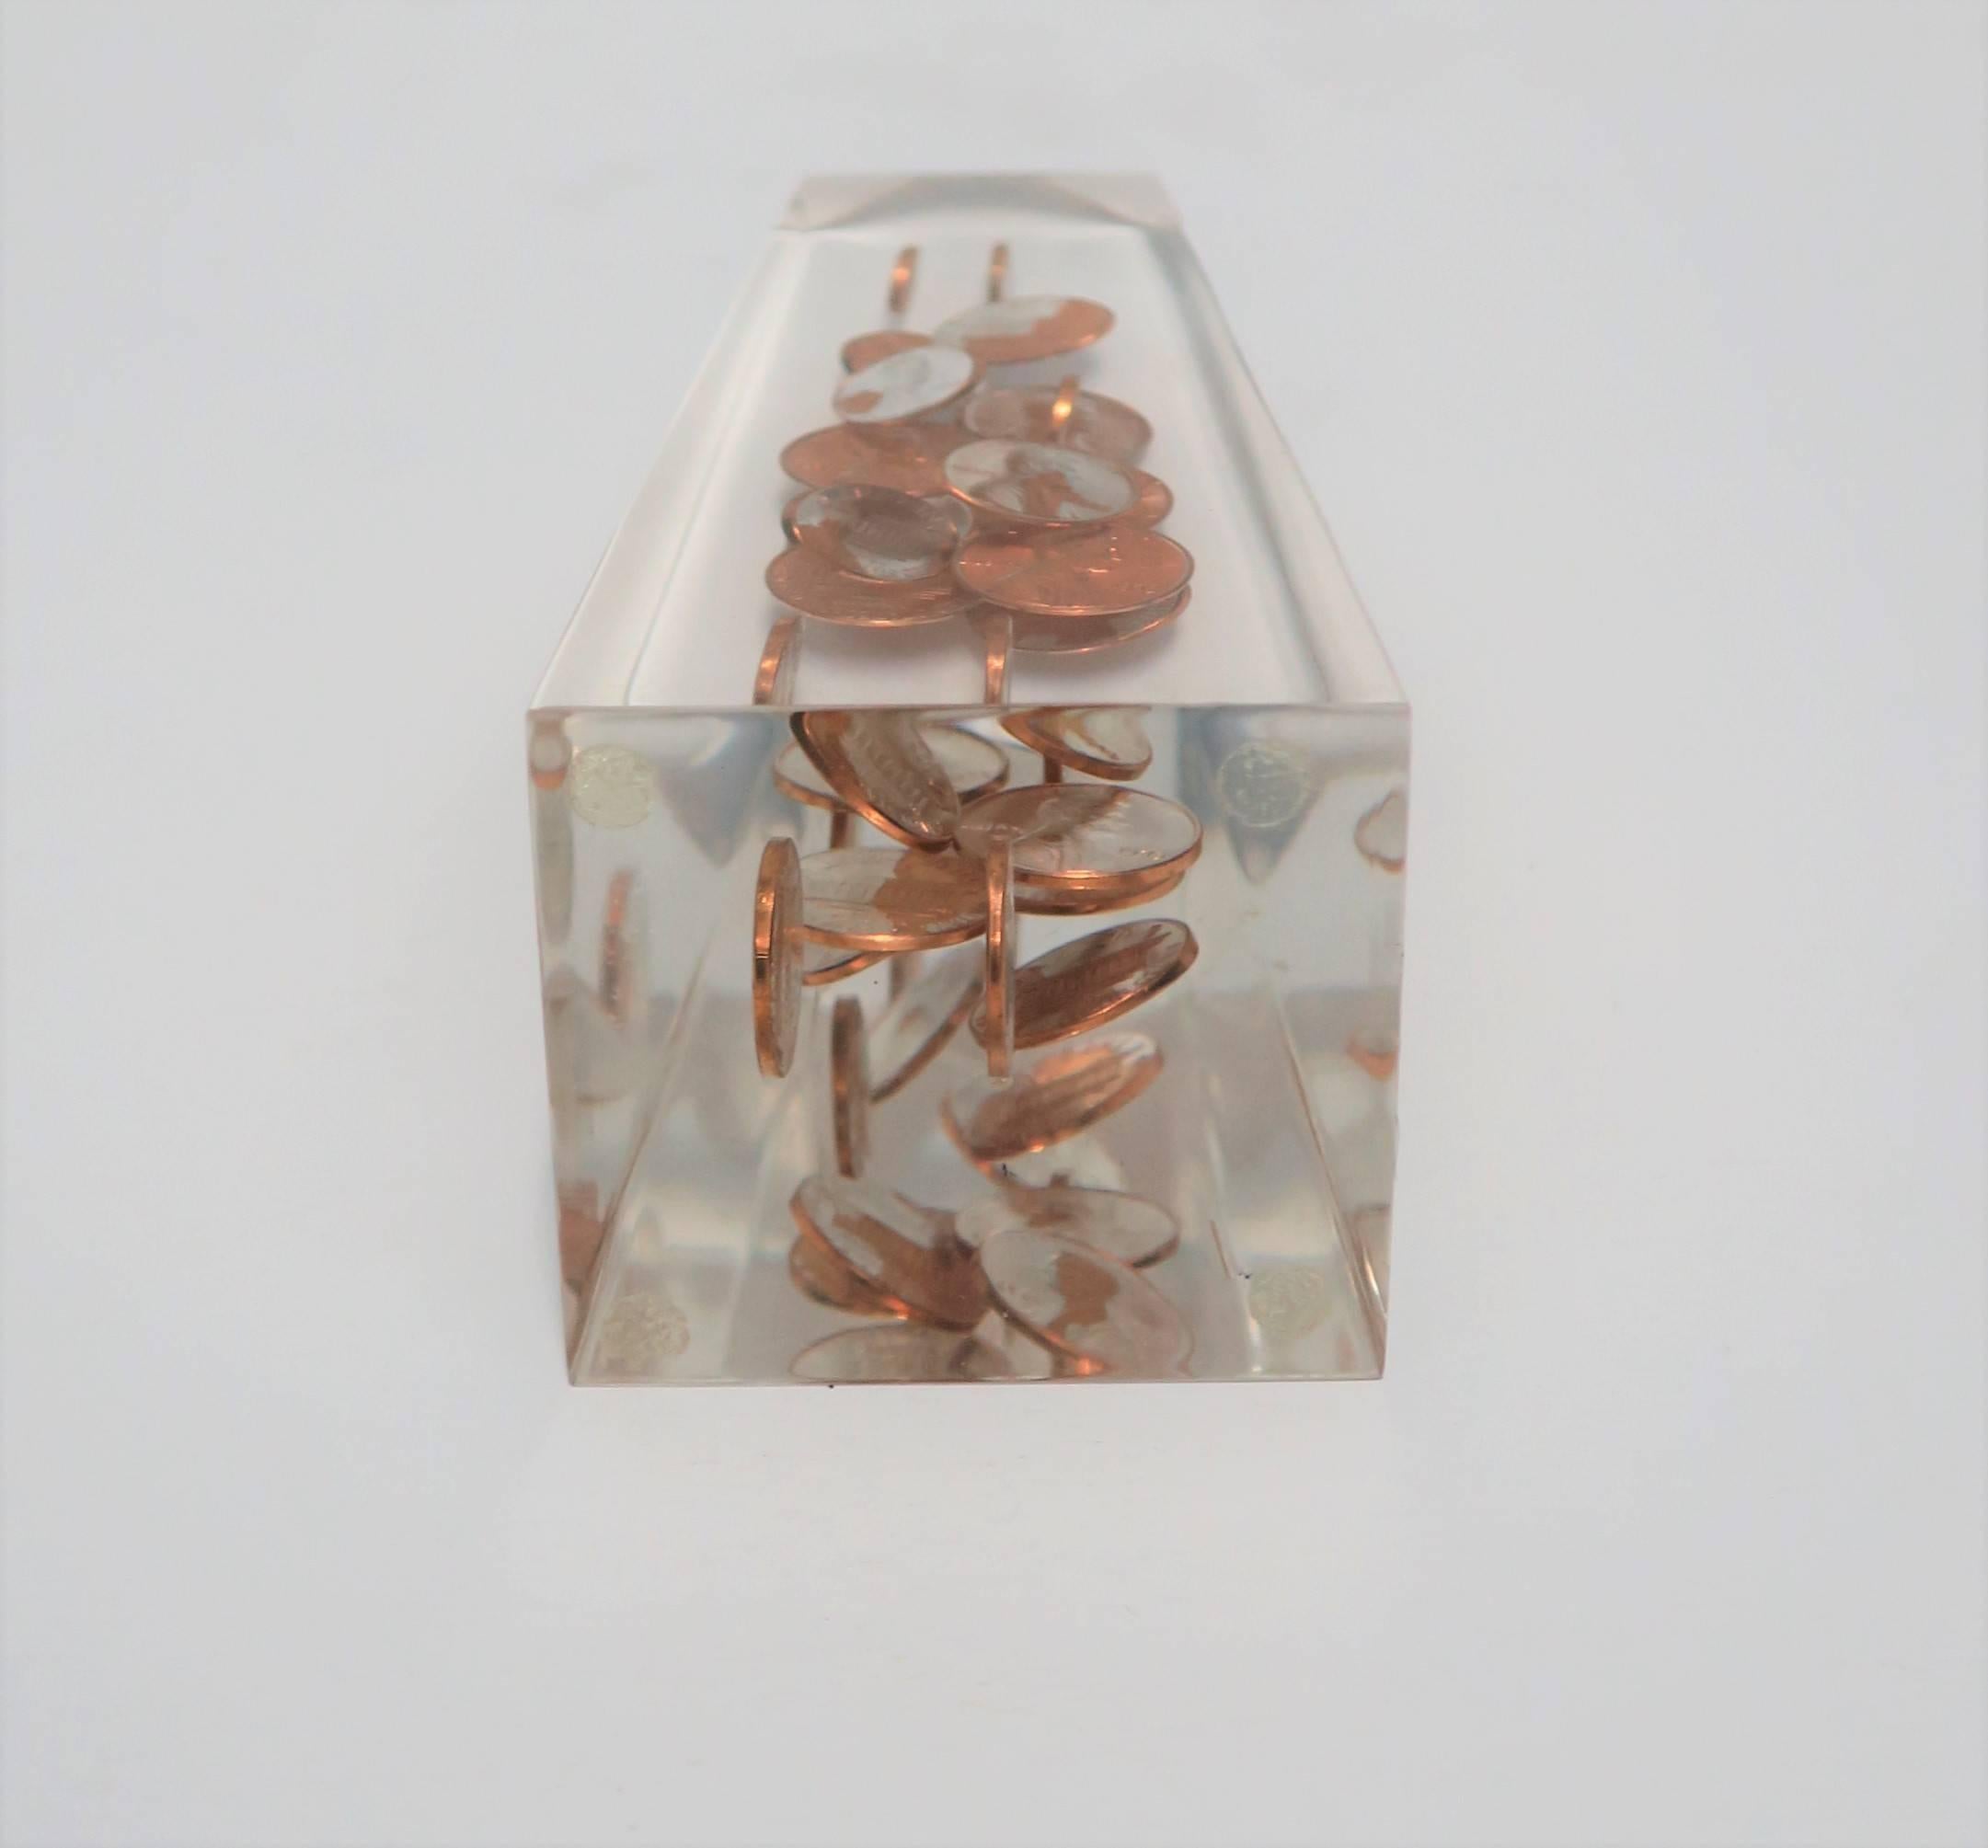 20th Century Modern Lucite and Copper Penny Obelisk, ca. 1970s For Sale